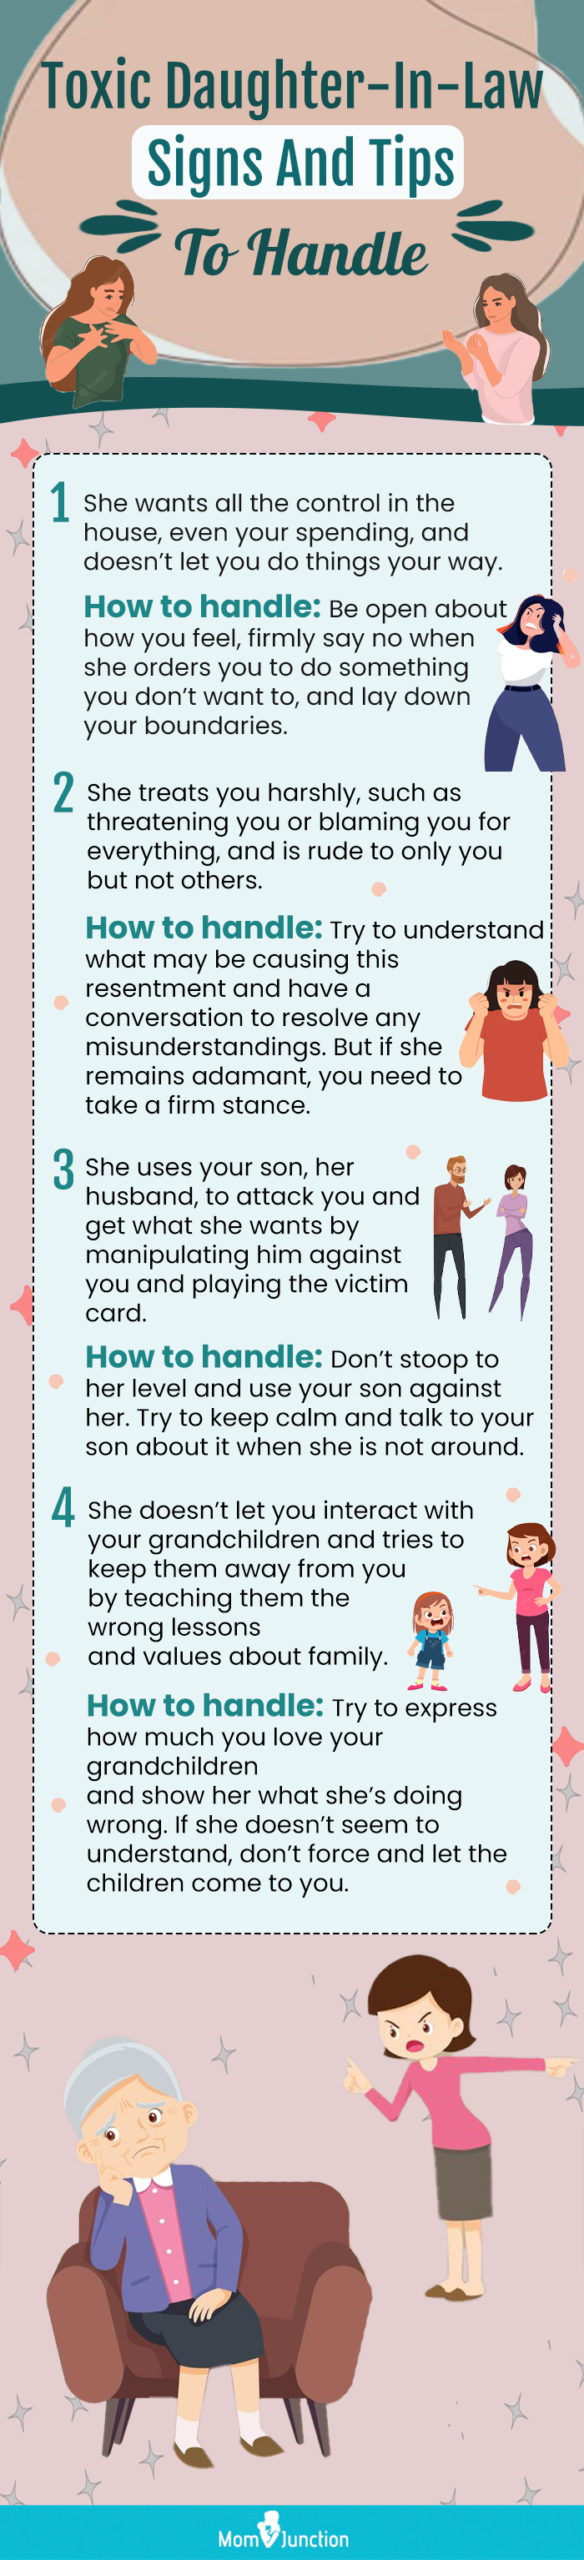 toxic daughter-in-law signs and tips to handle (infographic)